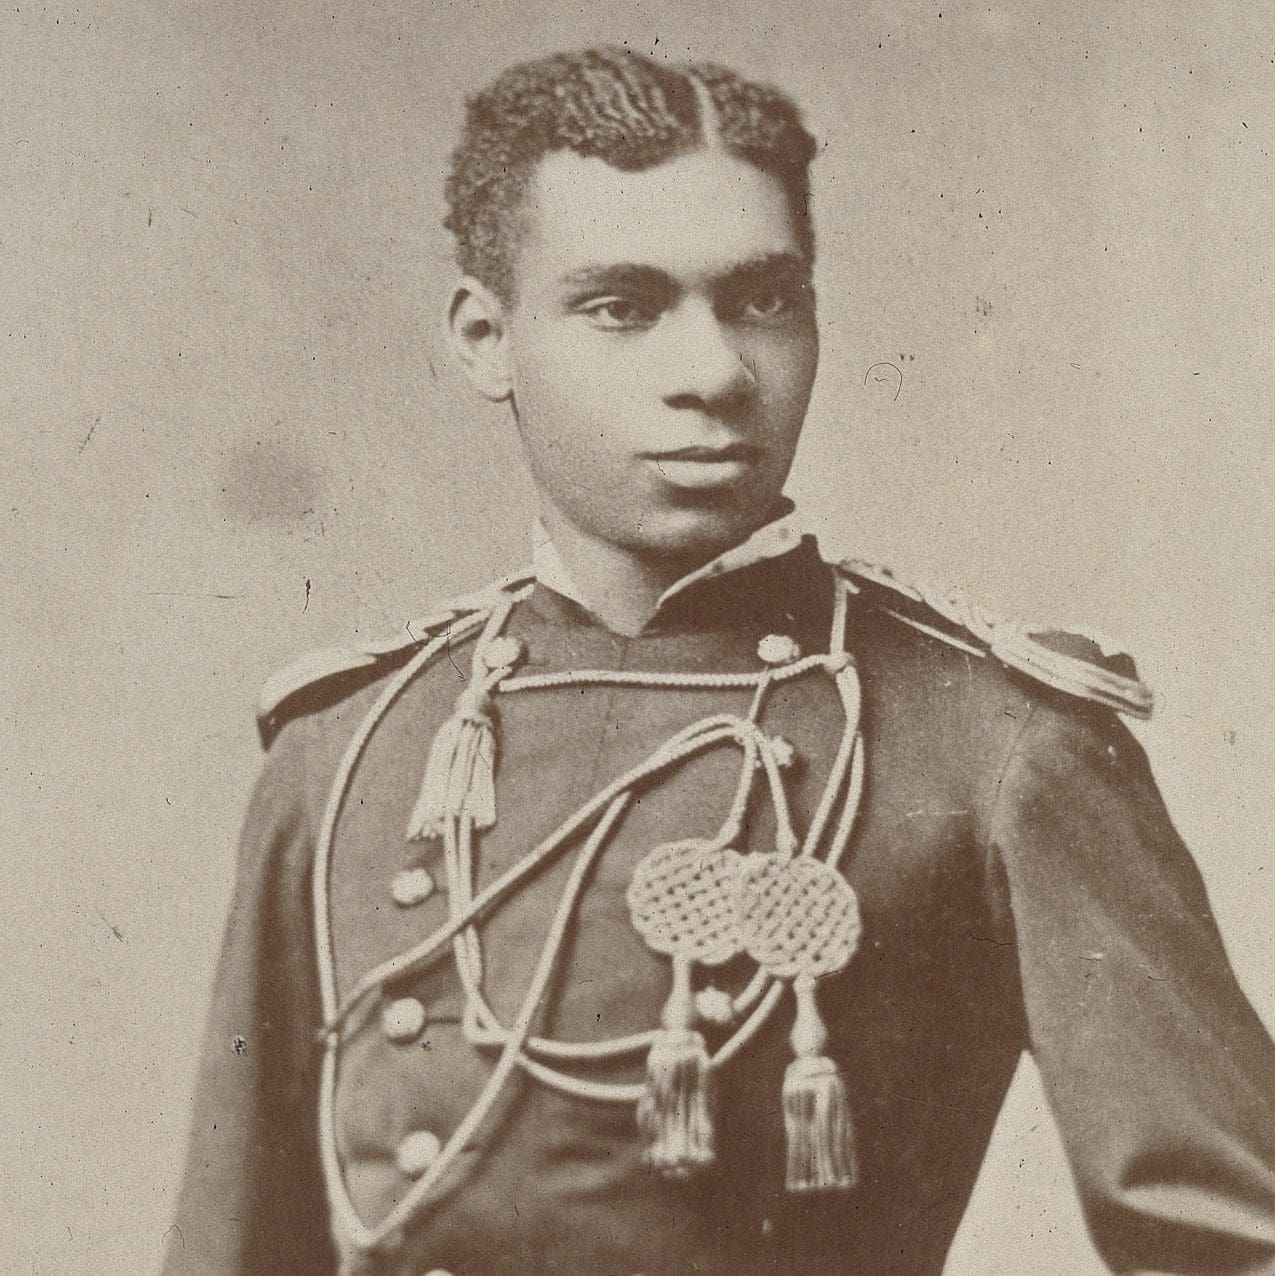 A vintage photo of a young man in a military uniform.
